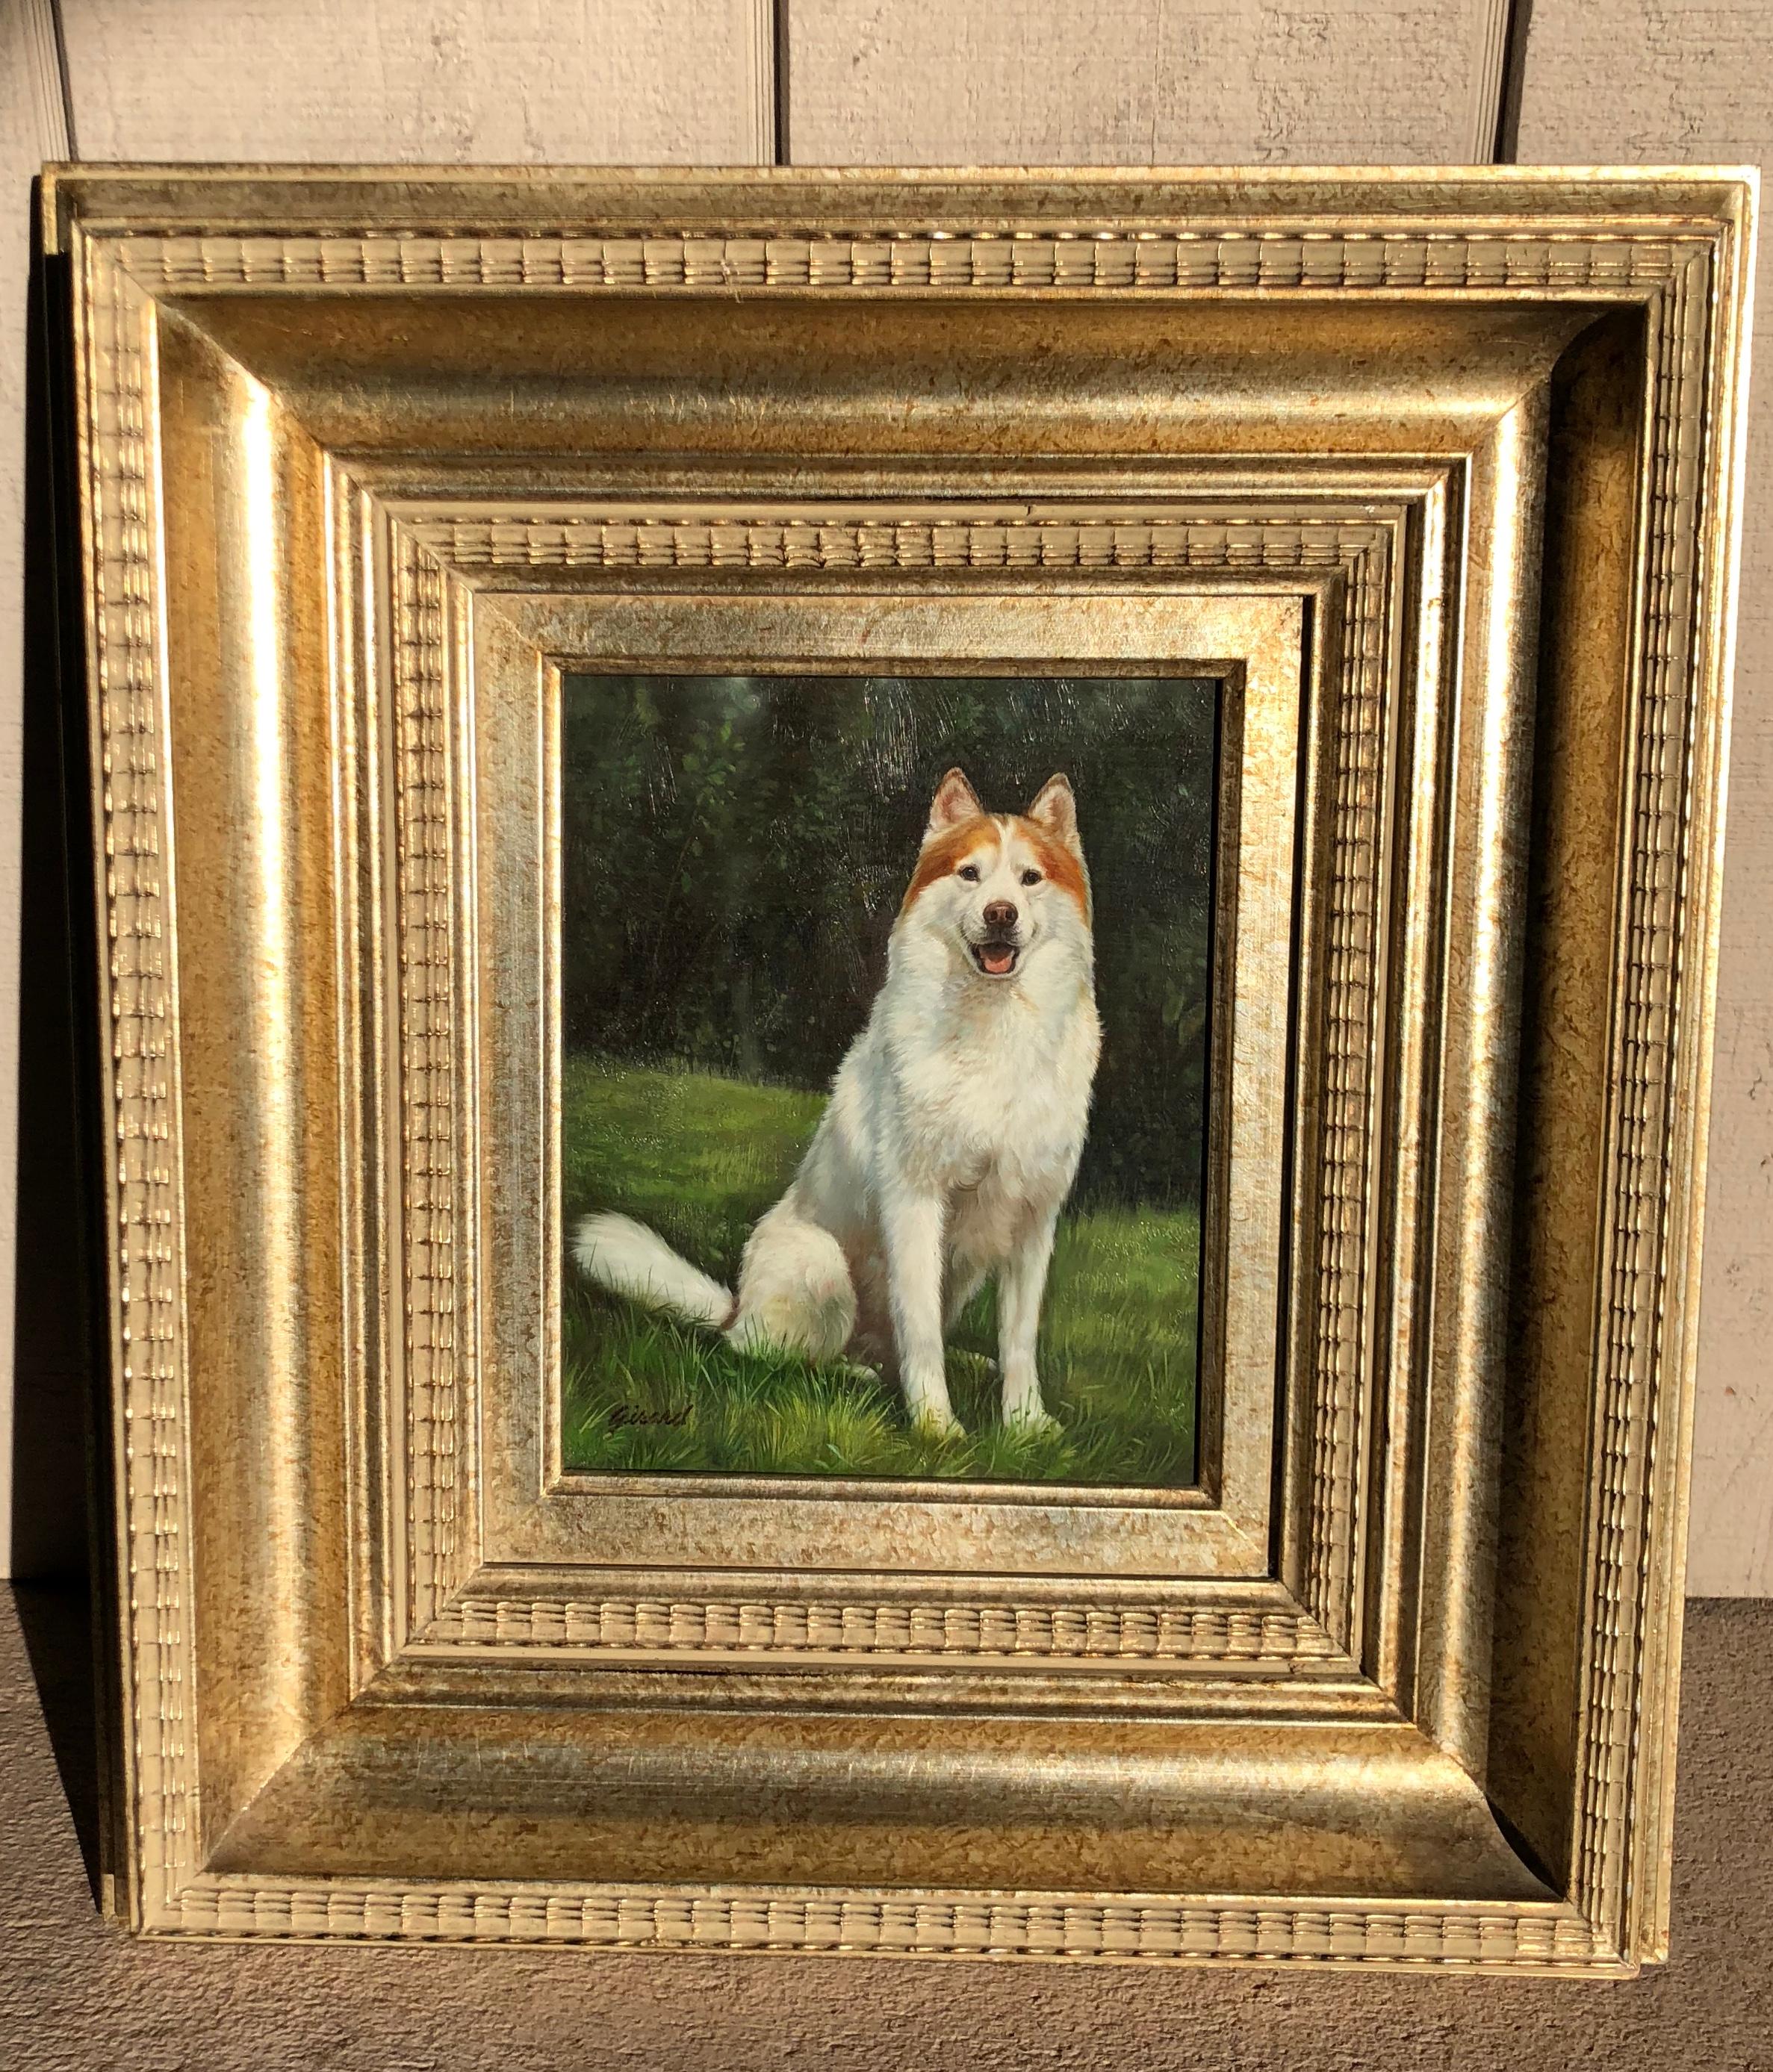 20th Century Excellent Quality Original Oil Painting of a Husky Dog by French Artist Girard